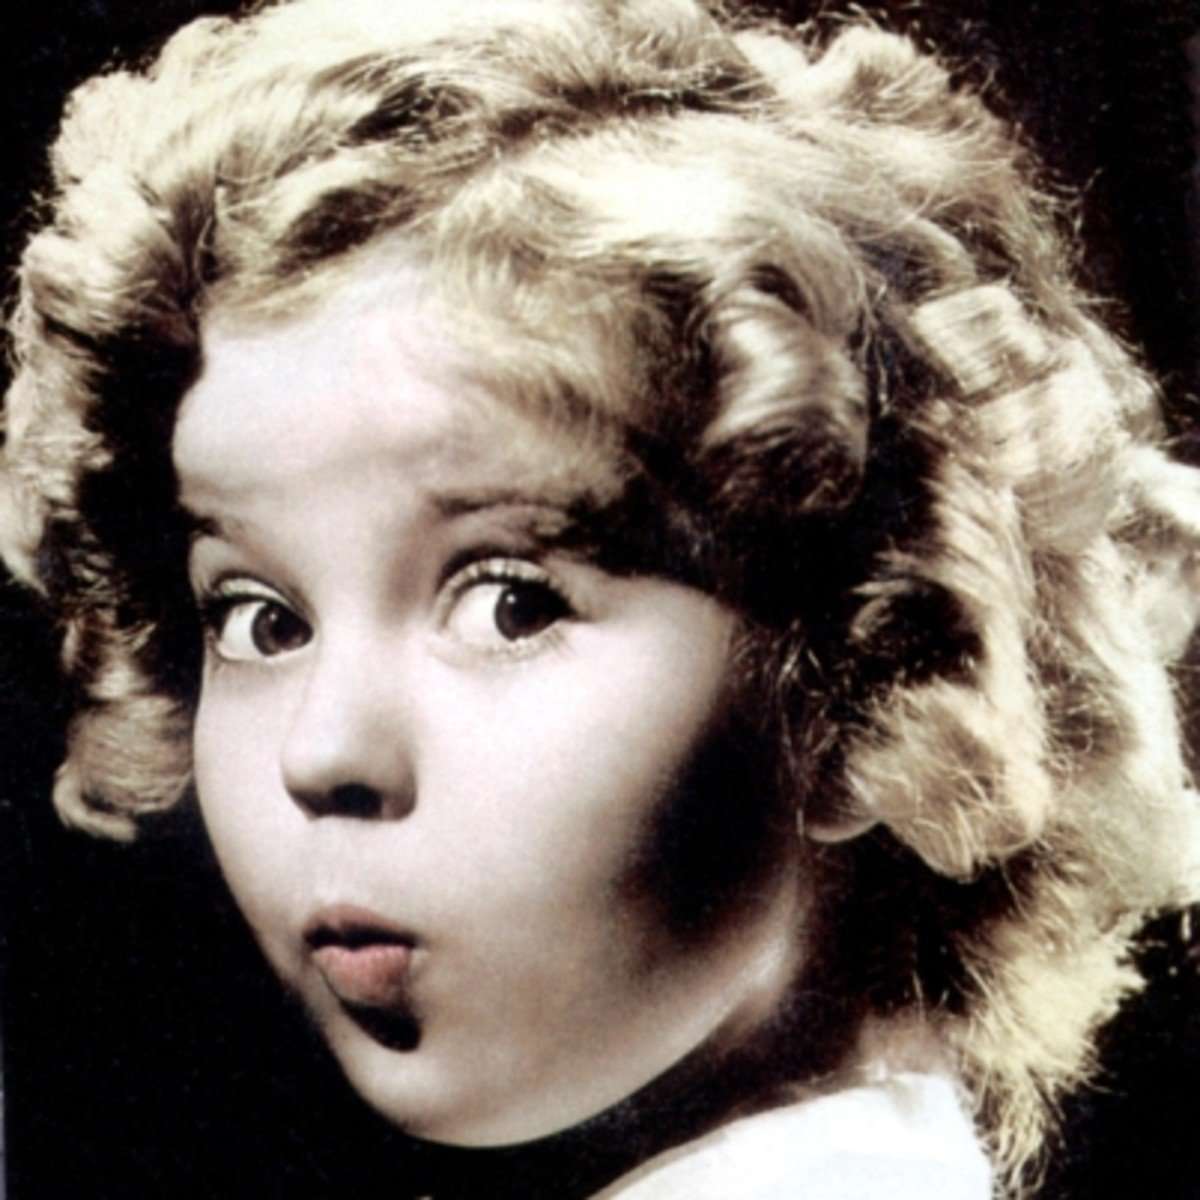 image for TIL When Shirley Temple's acting career fizzled out, she chose a second career in public service and became the U.S. ambassador to the U.N. in 1969.